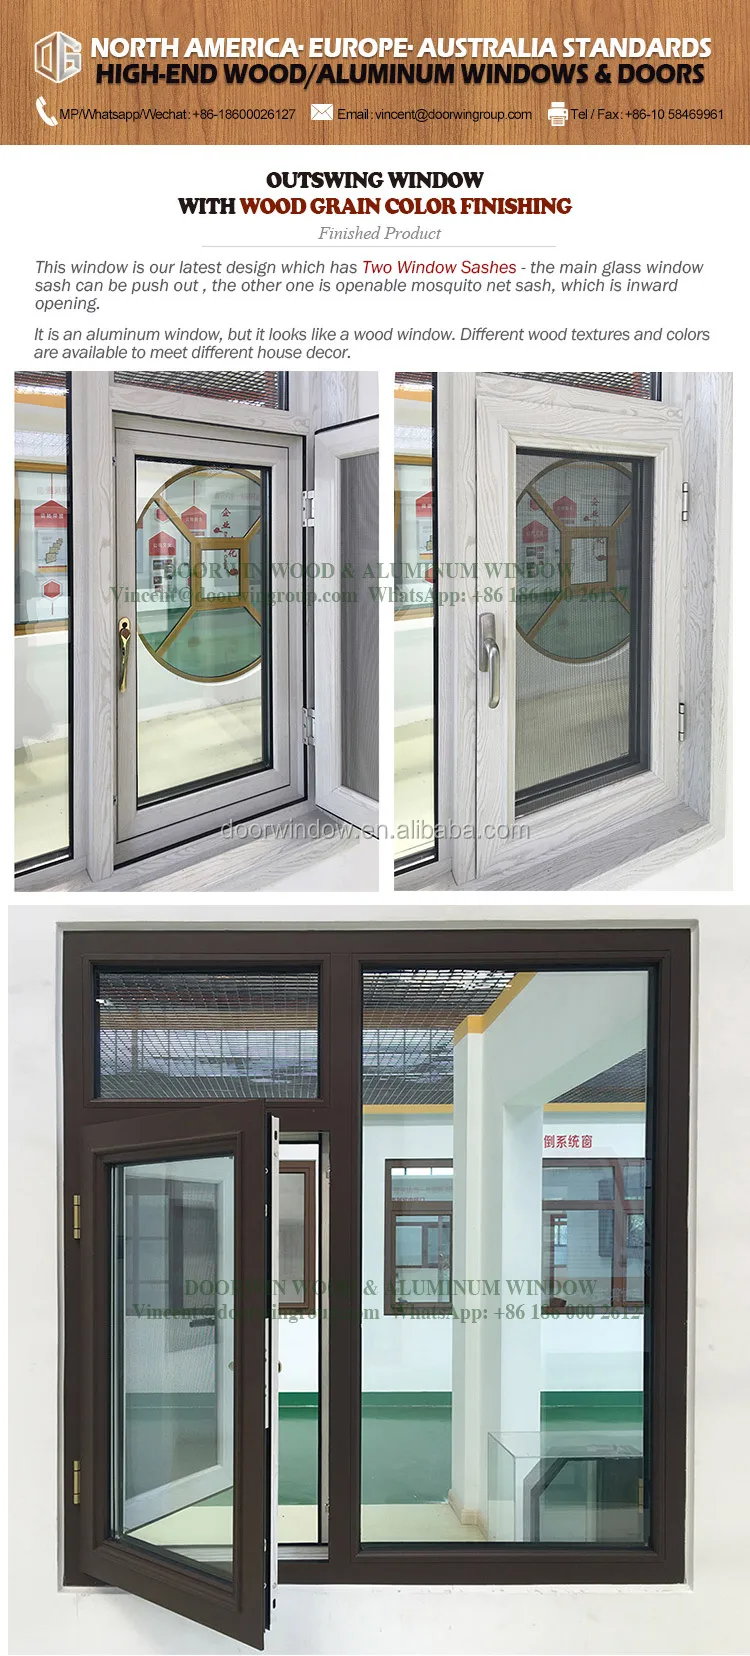 Wood grain Out swing Thermal Break Aluminum 24 x 48 casement window with Security Screen